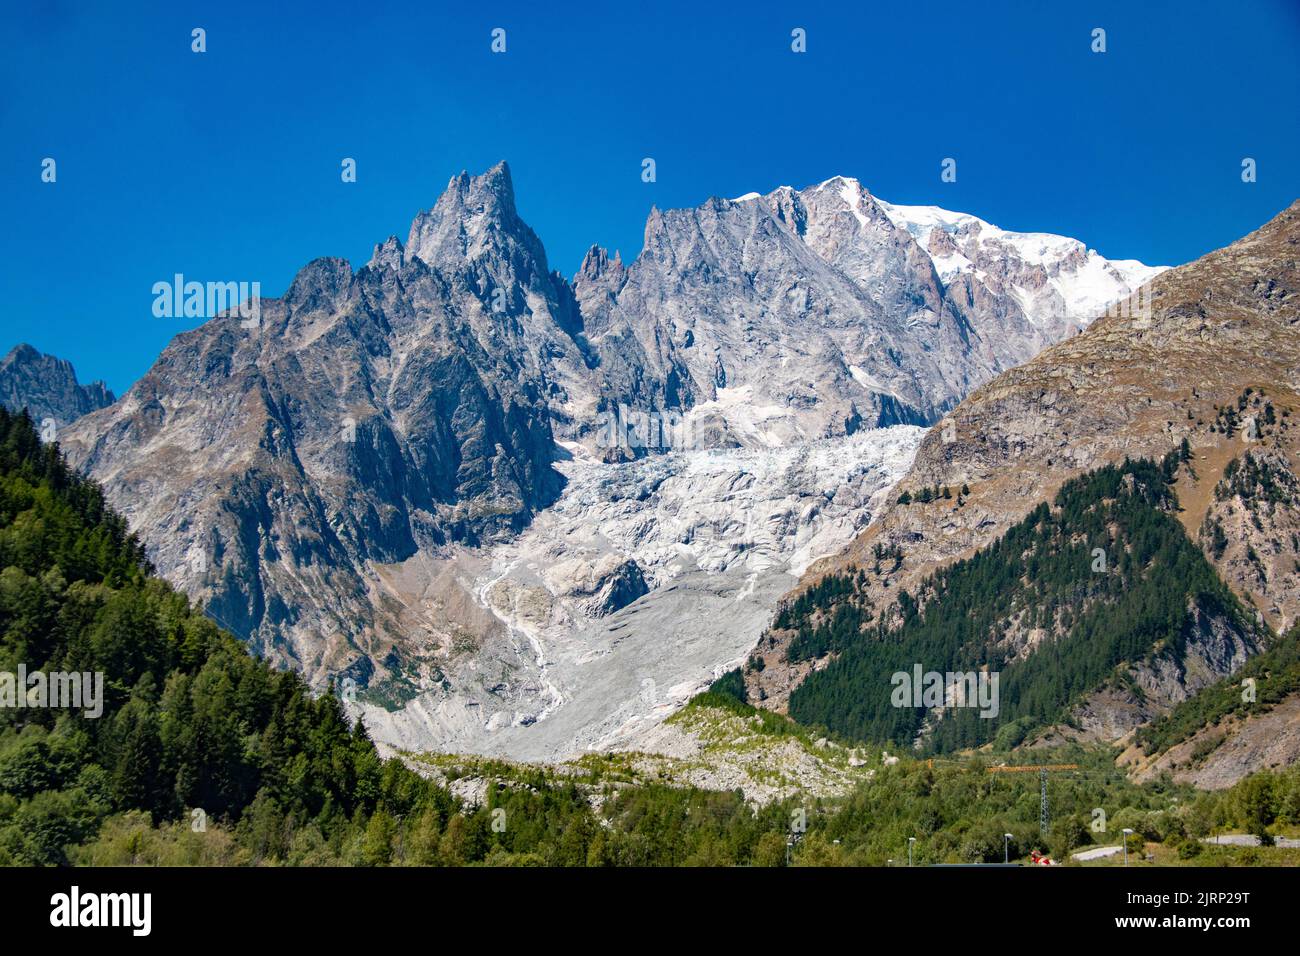 Snowy landscape in Summer of Monte Bianco (Mont Blanc) & Brenva Glacier from the Aosta Valley, Italy Stock Photo